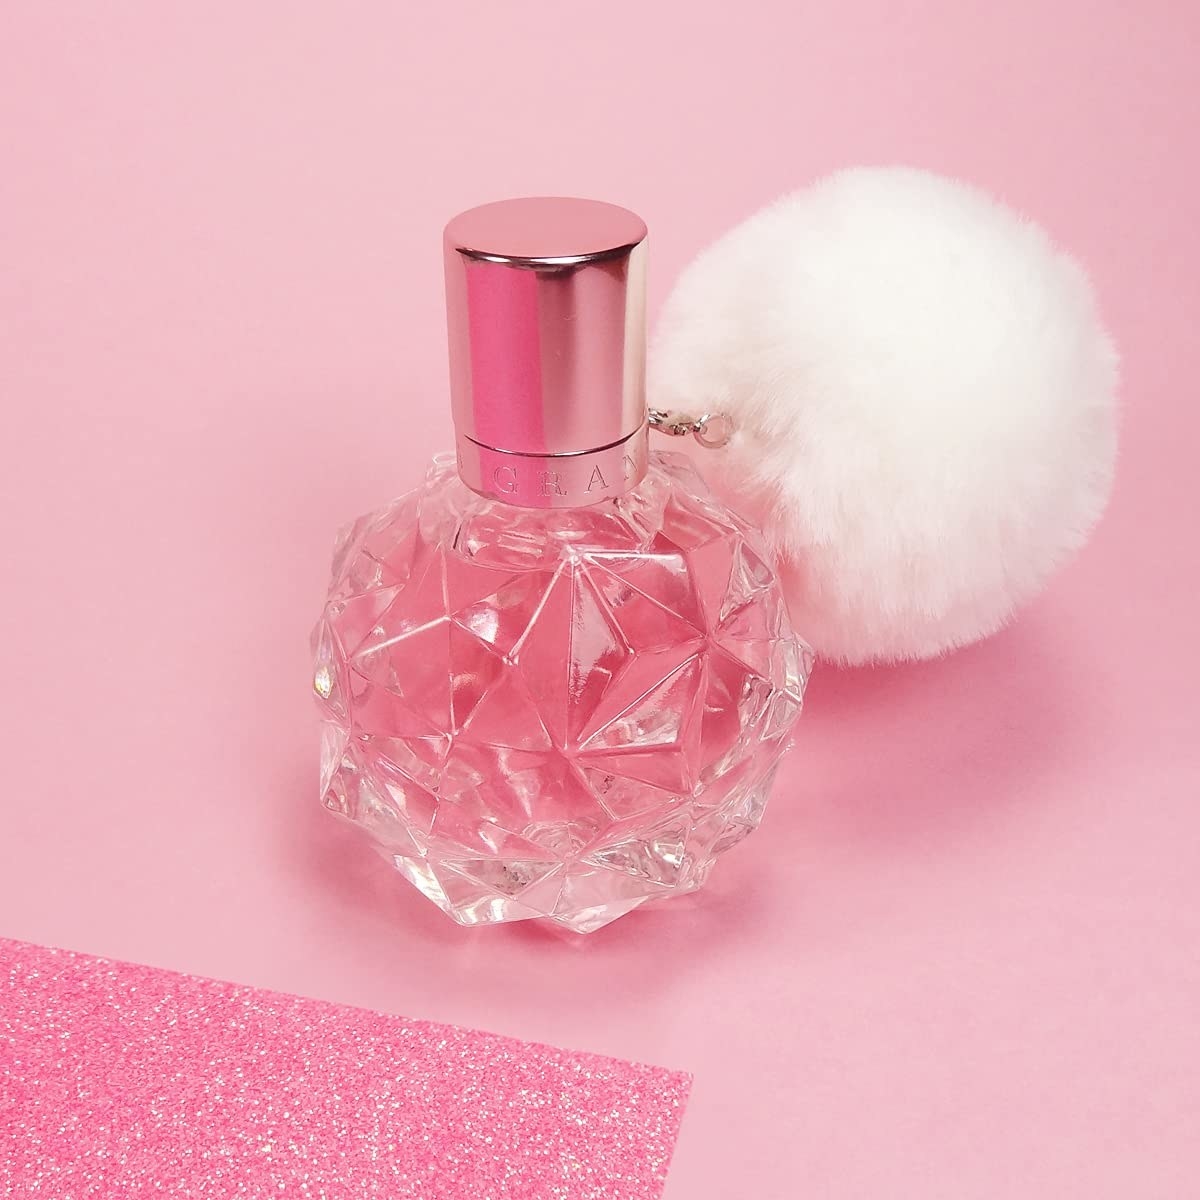 a bottle of the perfume